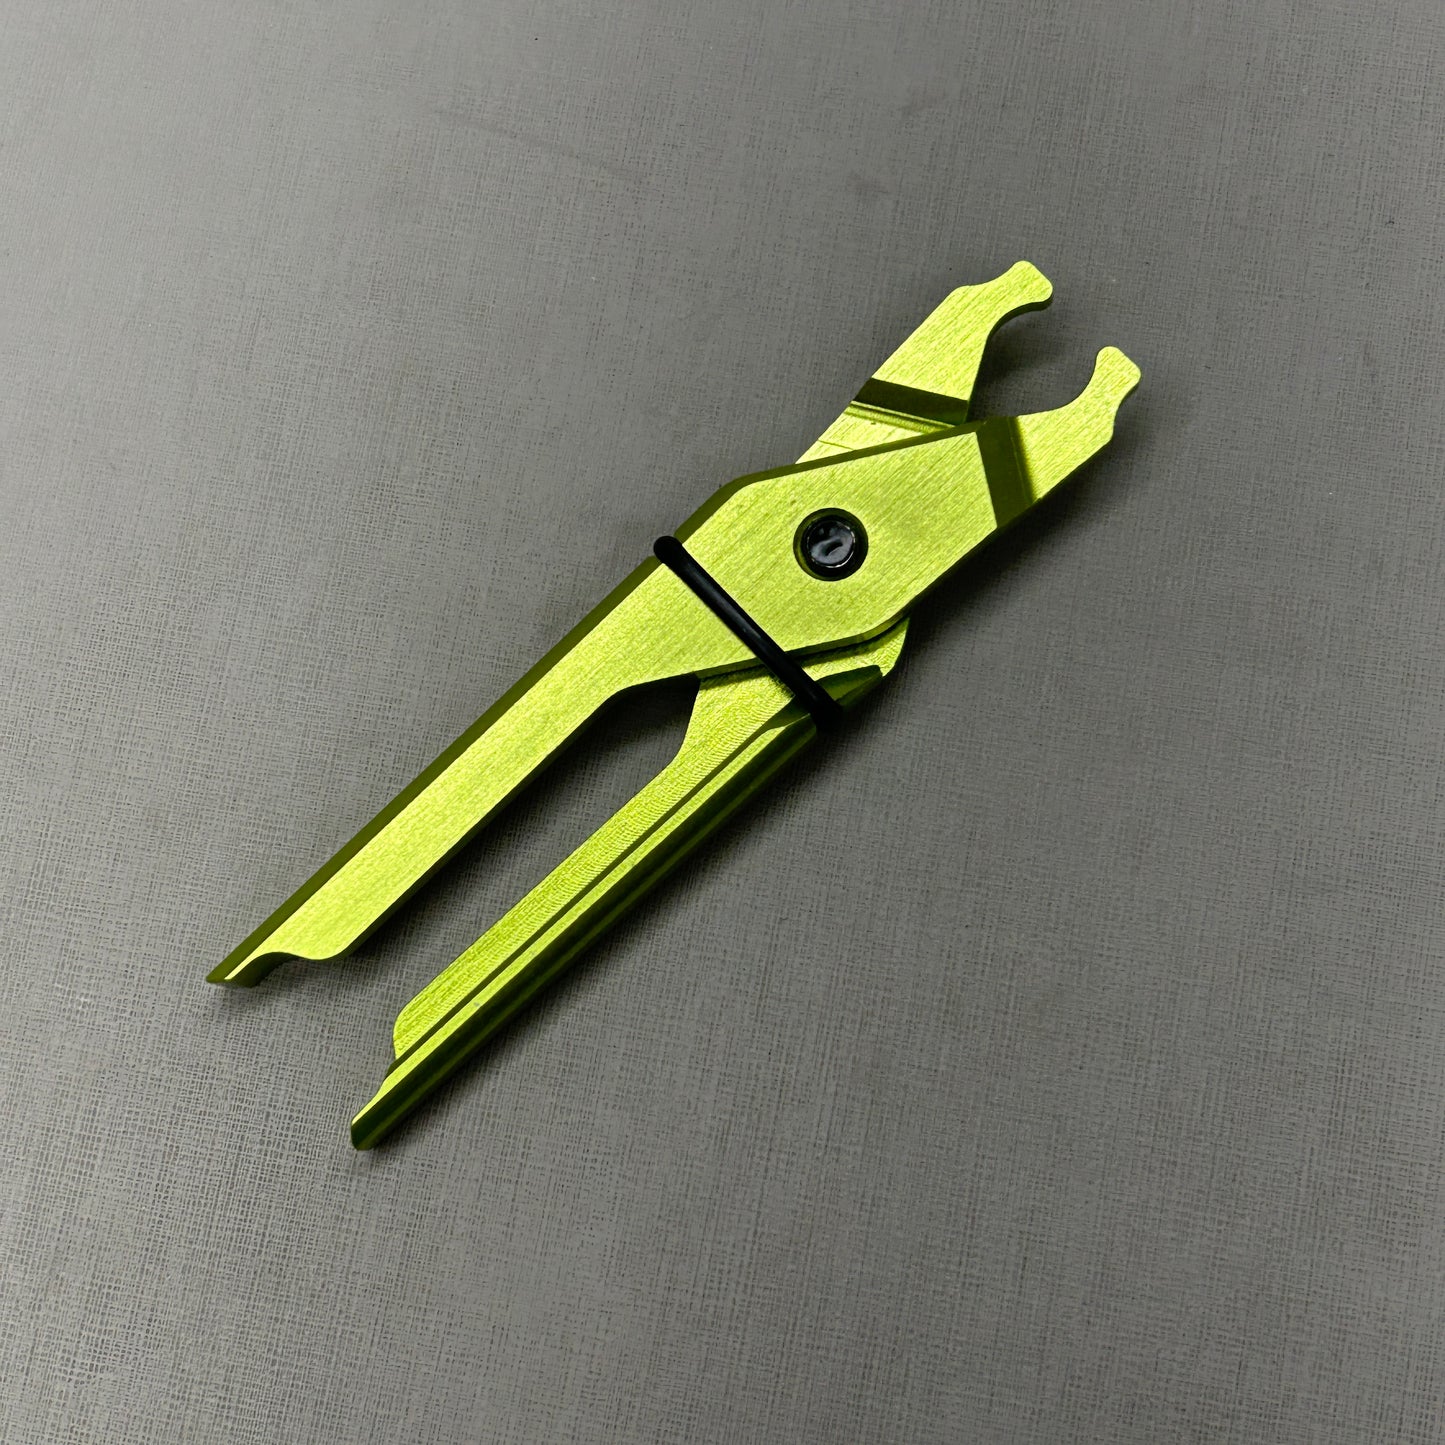 ONEUP Components EDC Plug & Pliers Kit - Green